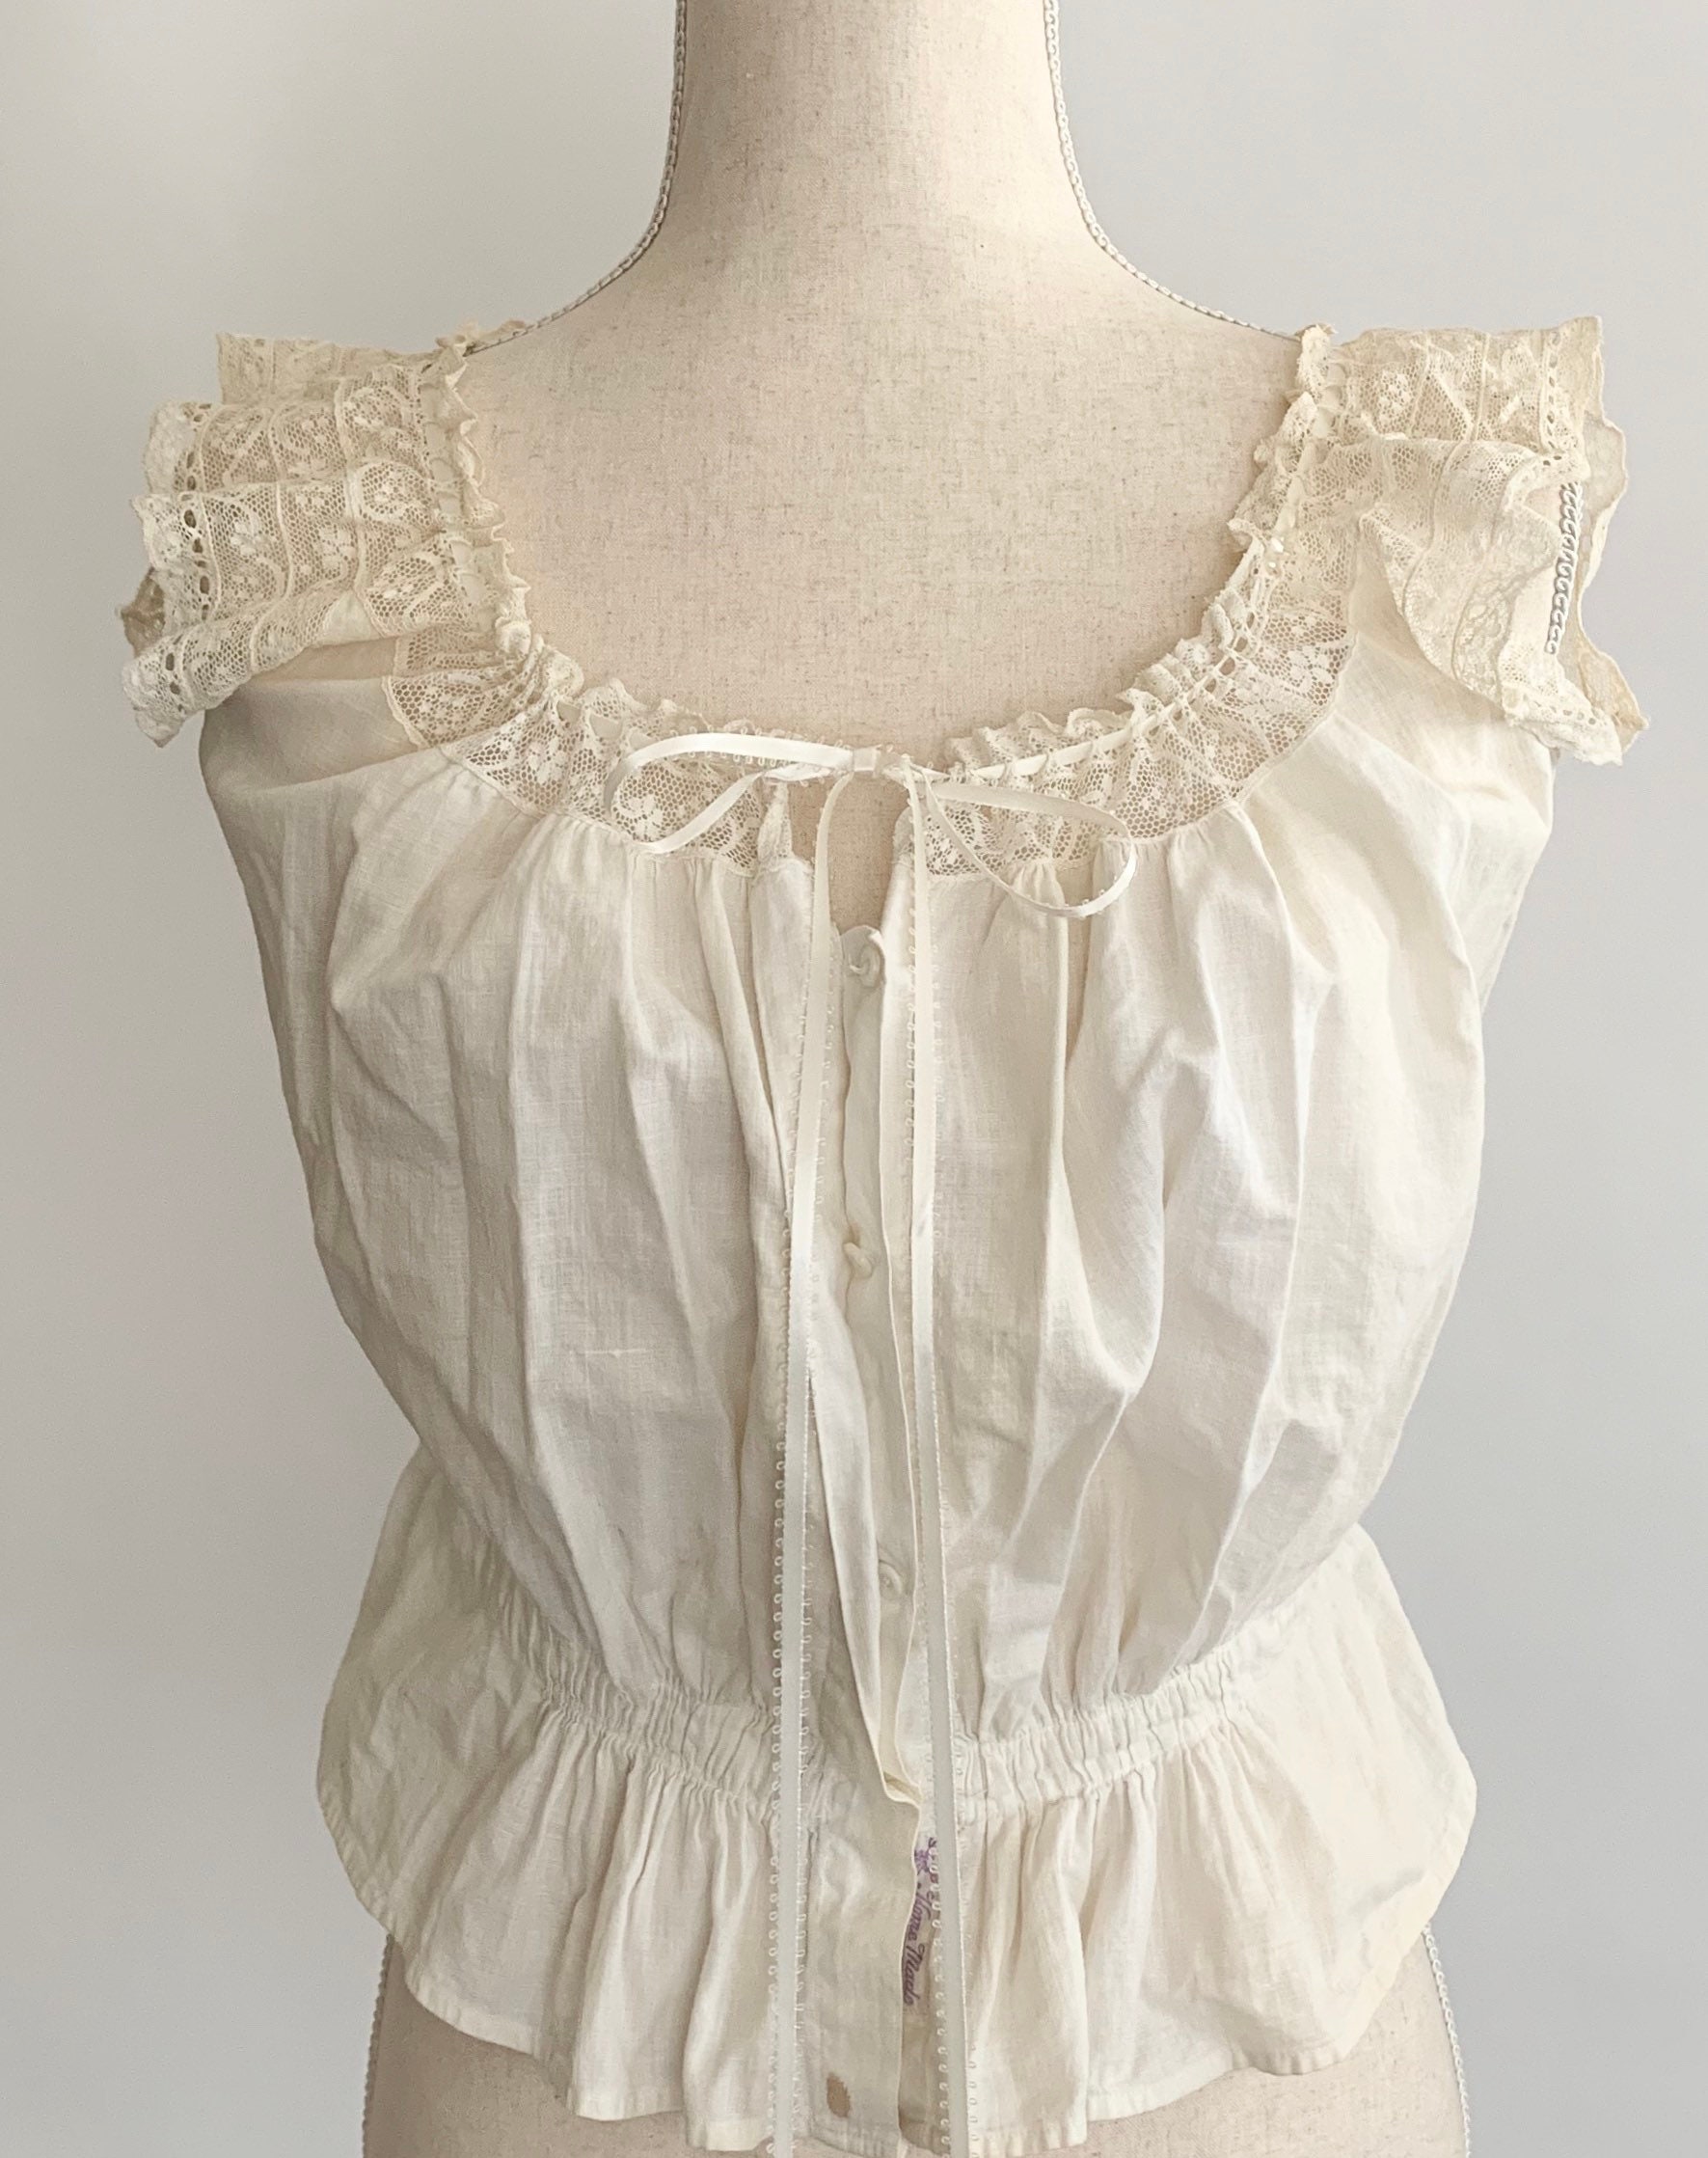 Late 1910s-Early 1920s Cotton Camisole / Corset Cover – Witchy Vintage